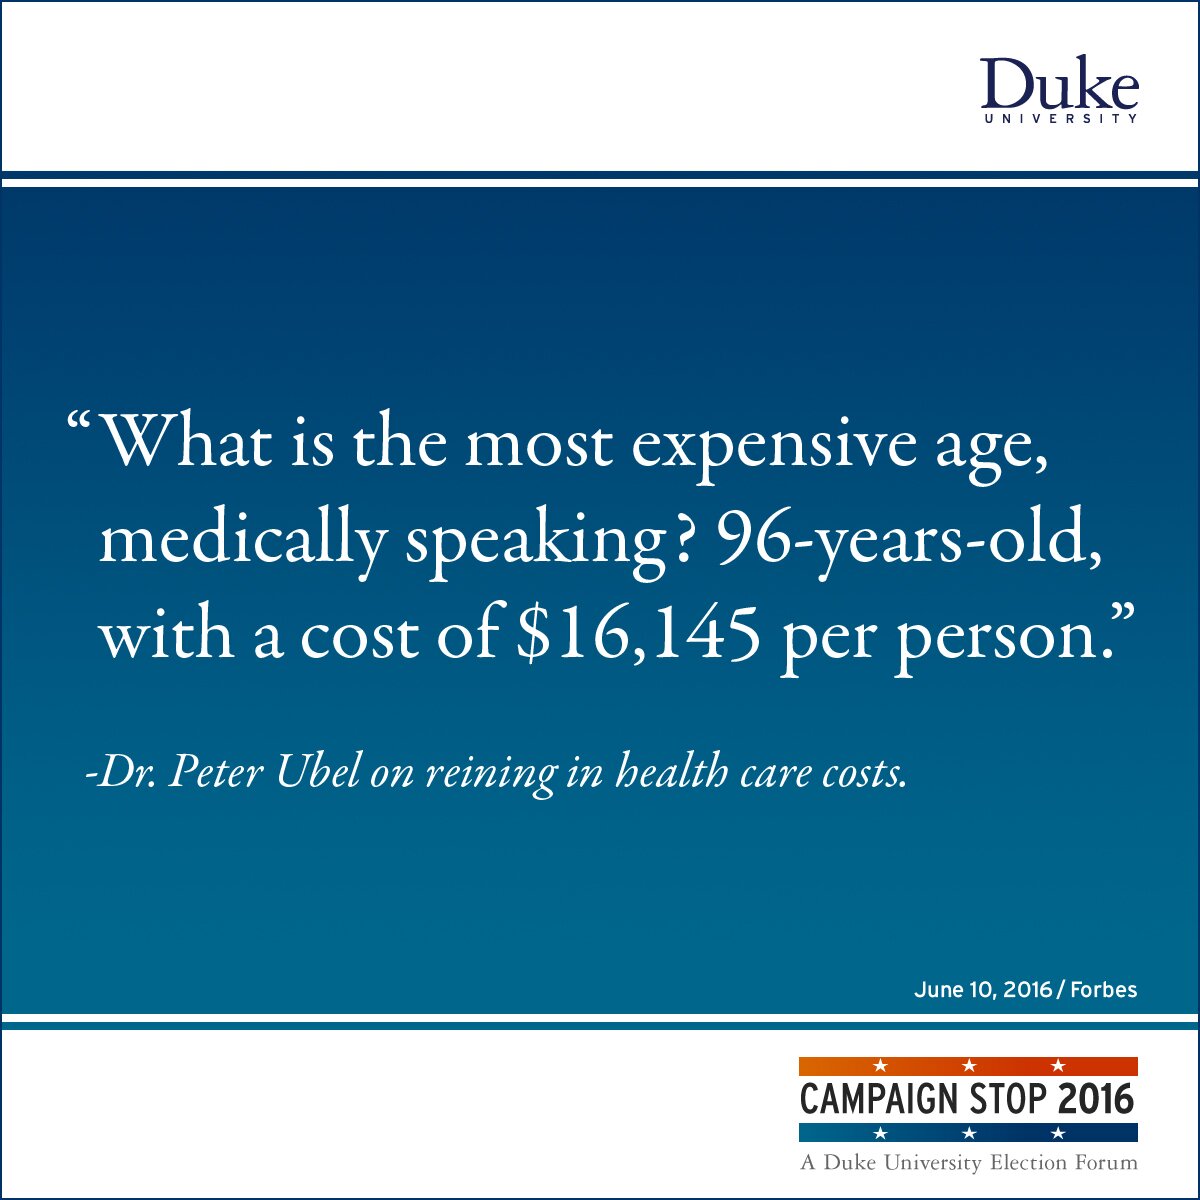 “What is the most expensive age, medically speaking? 96-years-old, with a cost of $16,145 per person.” -Dr. Peter Ubel on reining in health care costs.